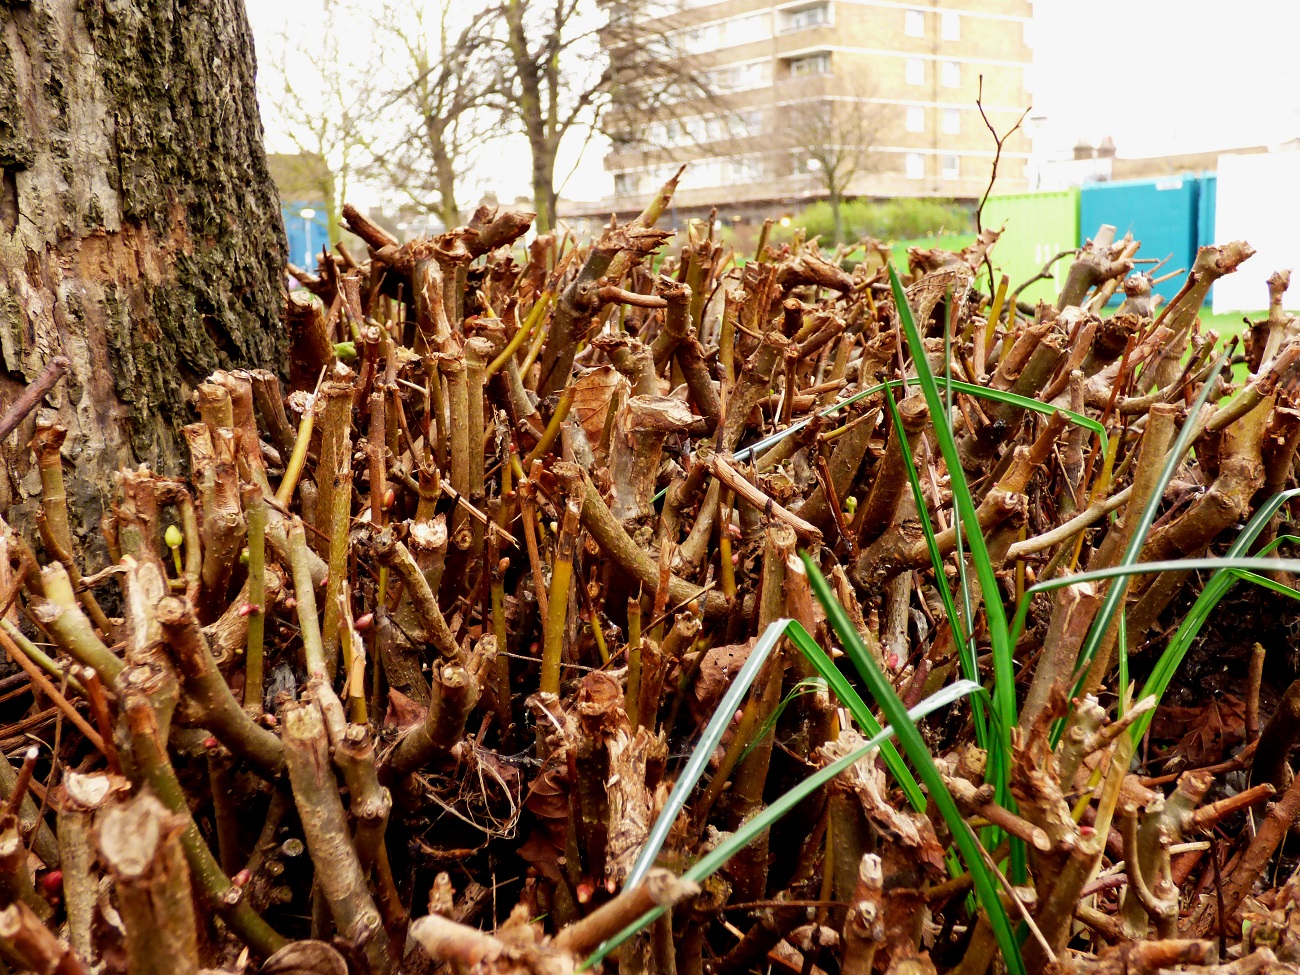 20170320_Tower-Hamlets_Dailing-Way_Sprouting-roots